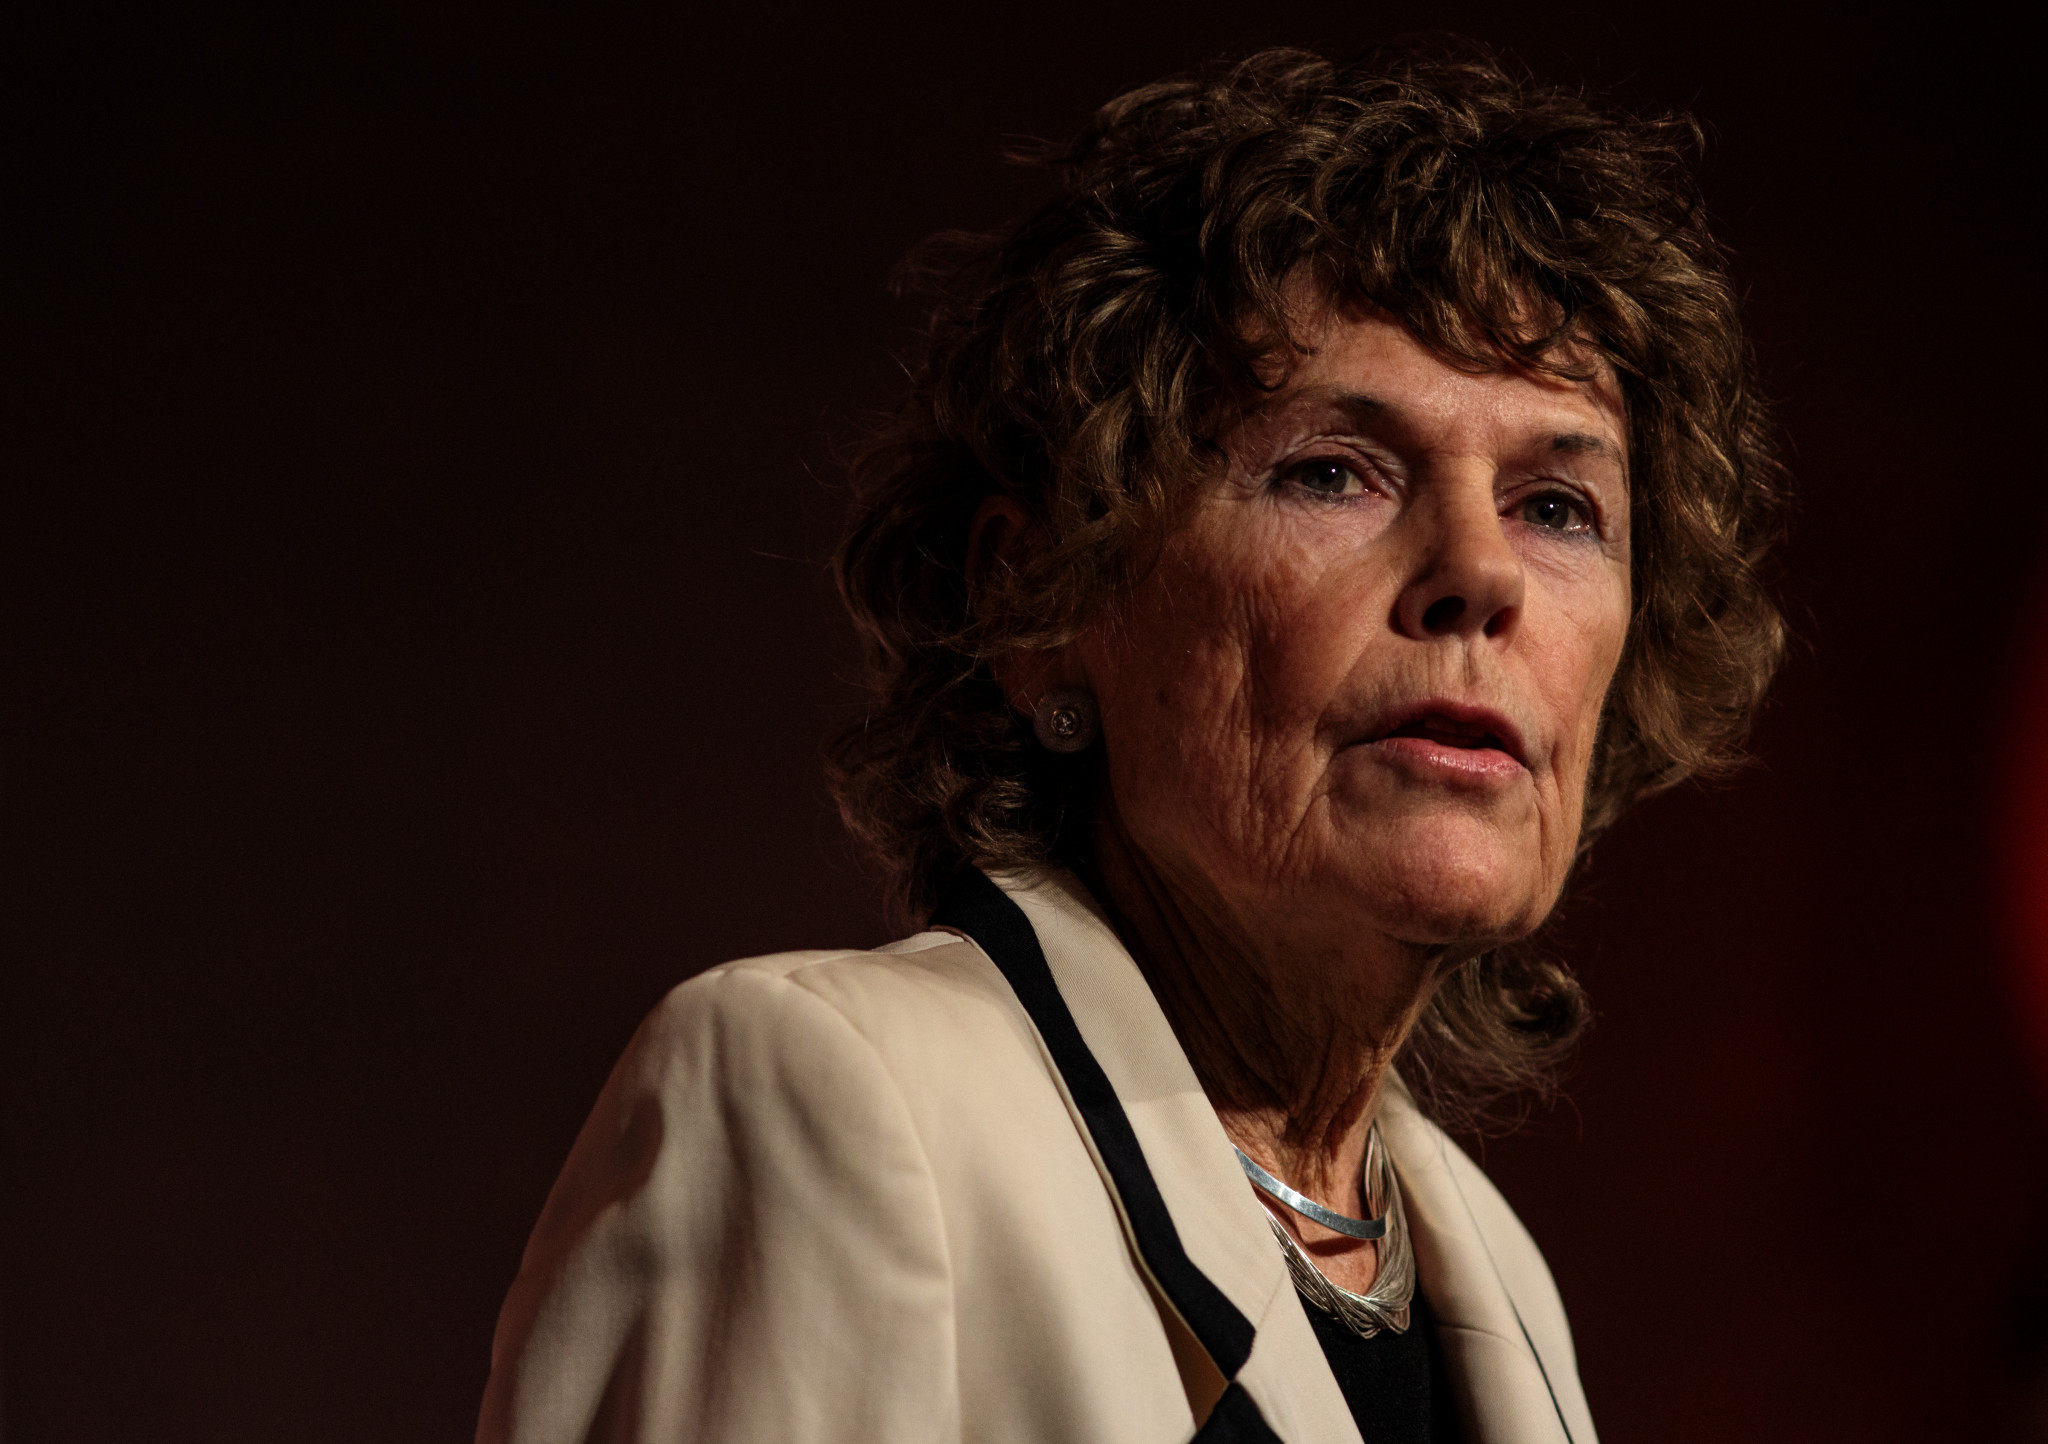 Kate Hoey, who served as a Member of Parliament in the UK for more than 30 years was recently appointed to the House of Lord's ©Getty Images